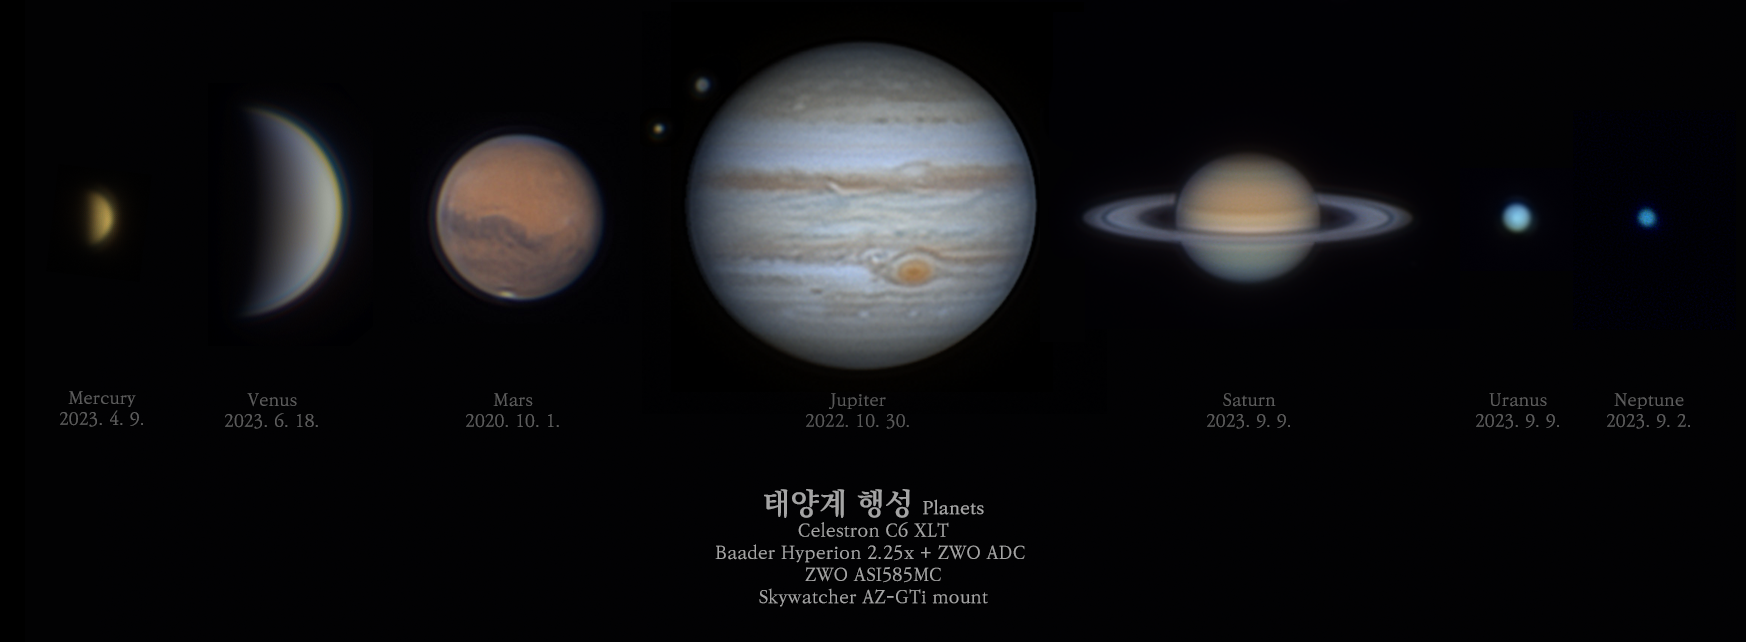 2023-09-01-planets_v3.png